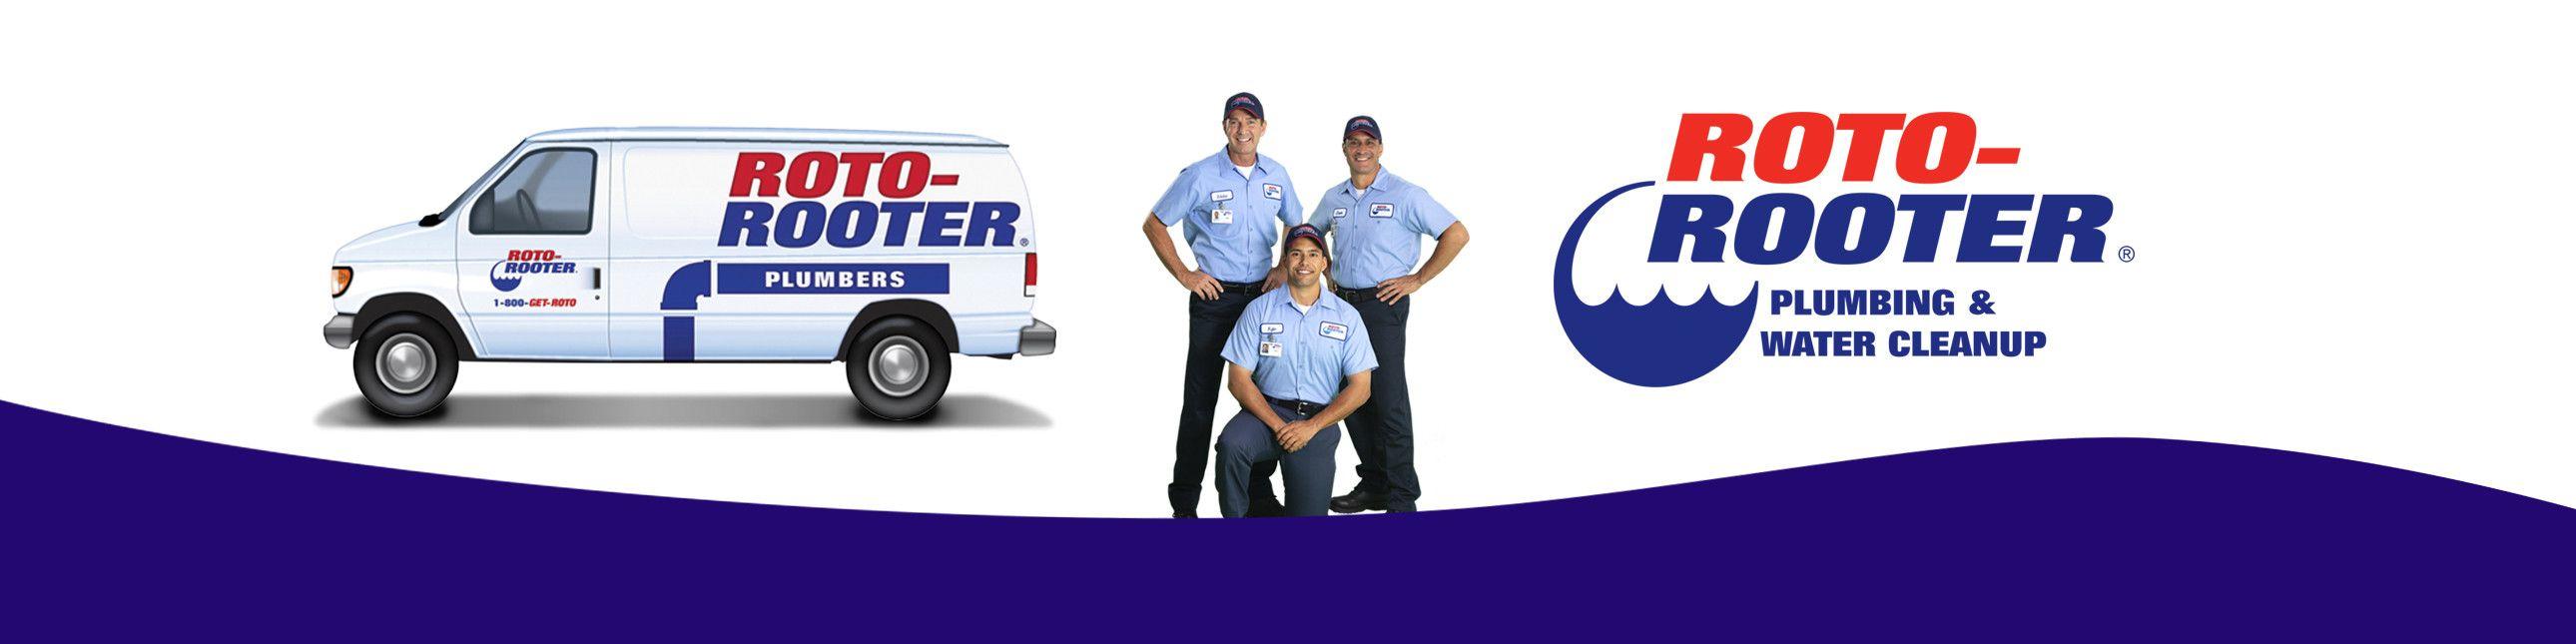 Roto-Rooter Logo - Roto Rooter Plumbing And Drain Service